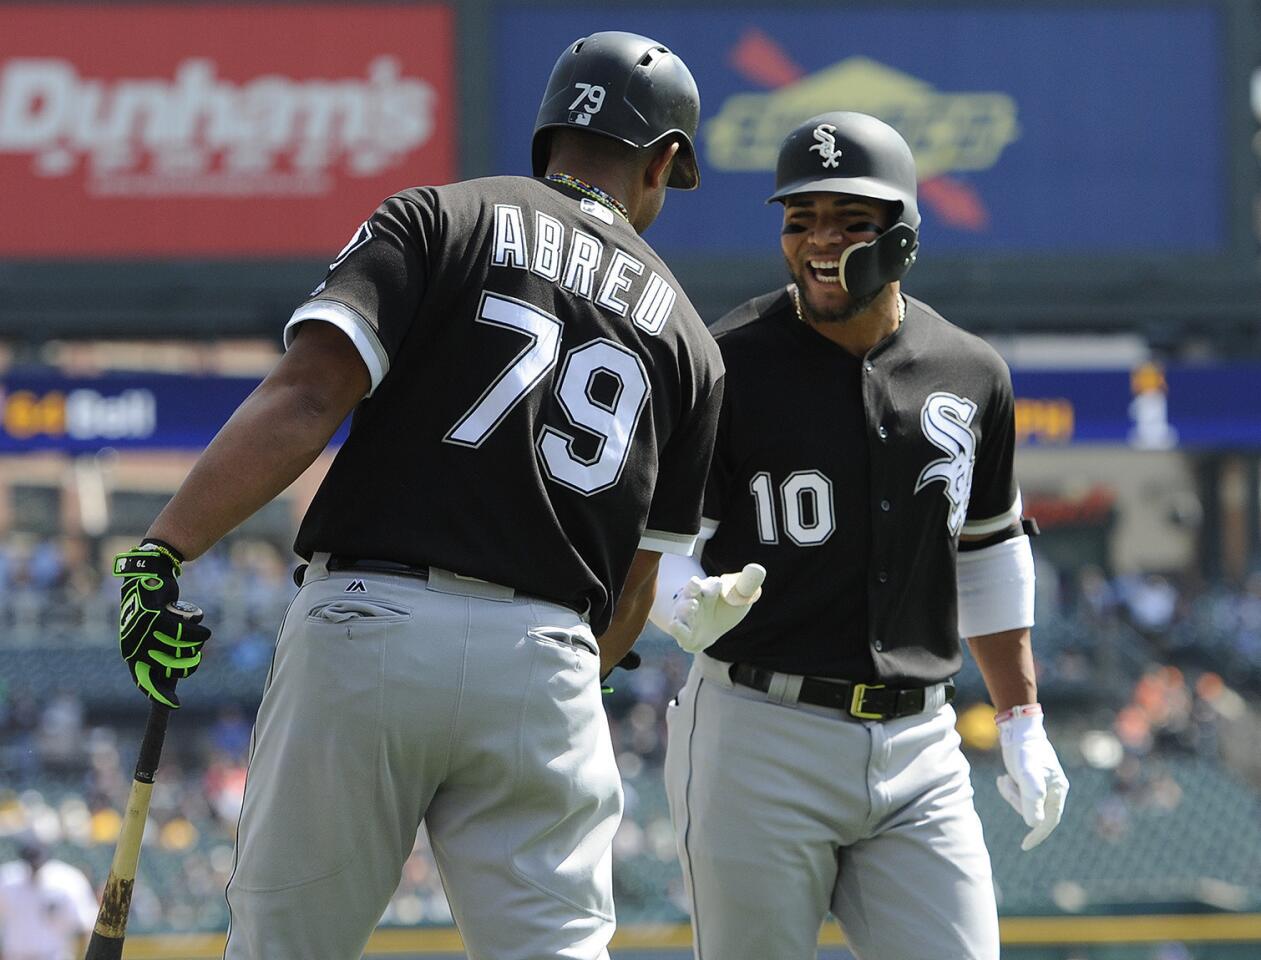 Yoan Moncada (10) is congratulated by Jose Abreu (79) after hitting a home run against the Tigers Thursday, Sept. 14, 2017, in Detroit.